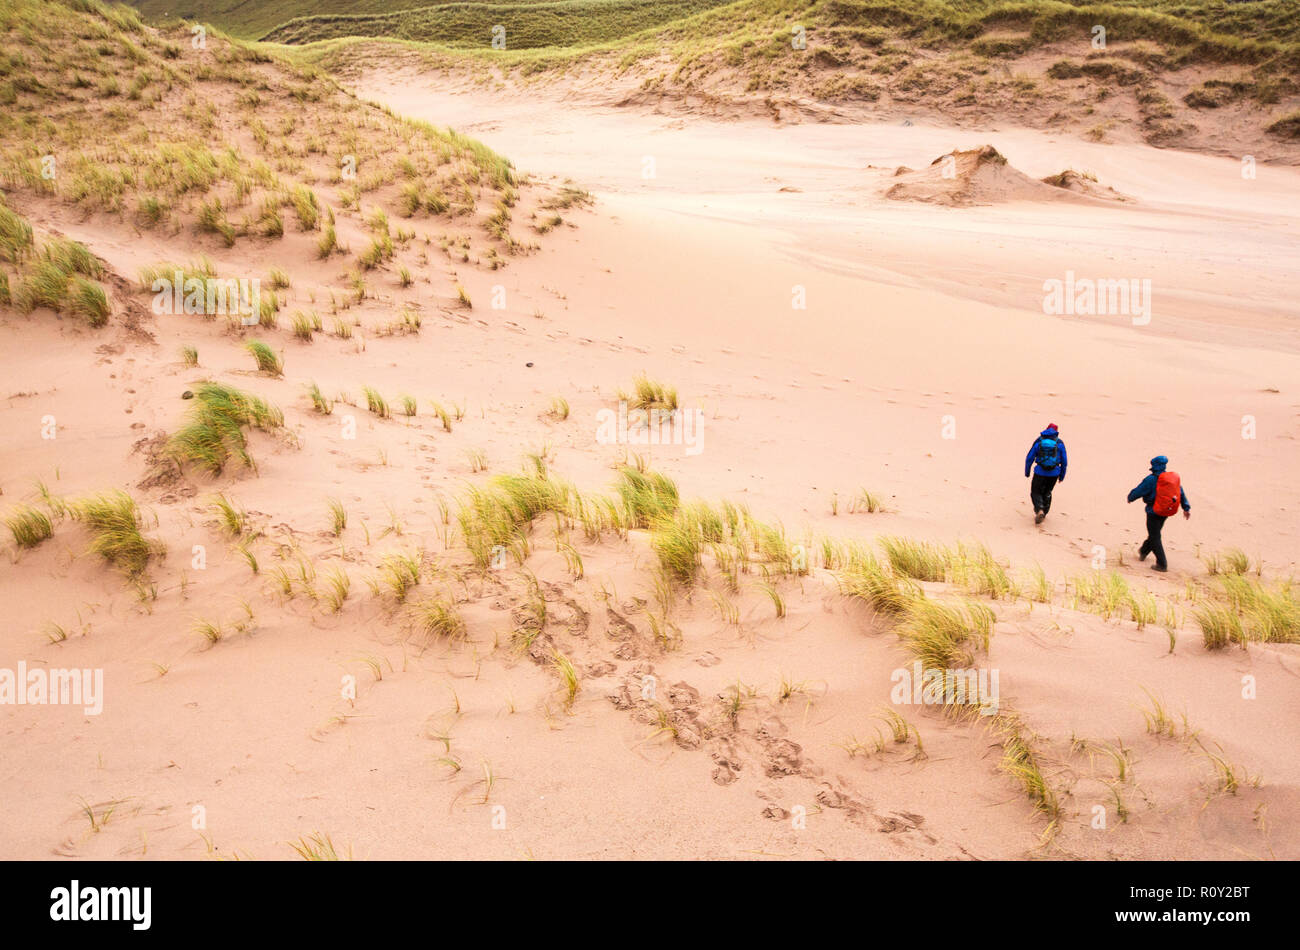 A large blowout in sand dunes at Sandwood Bay, Sutherland, Scotland, UK. Stock Photo